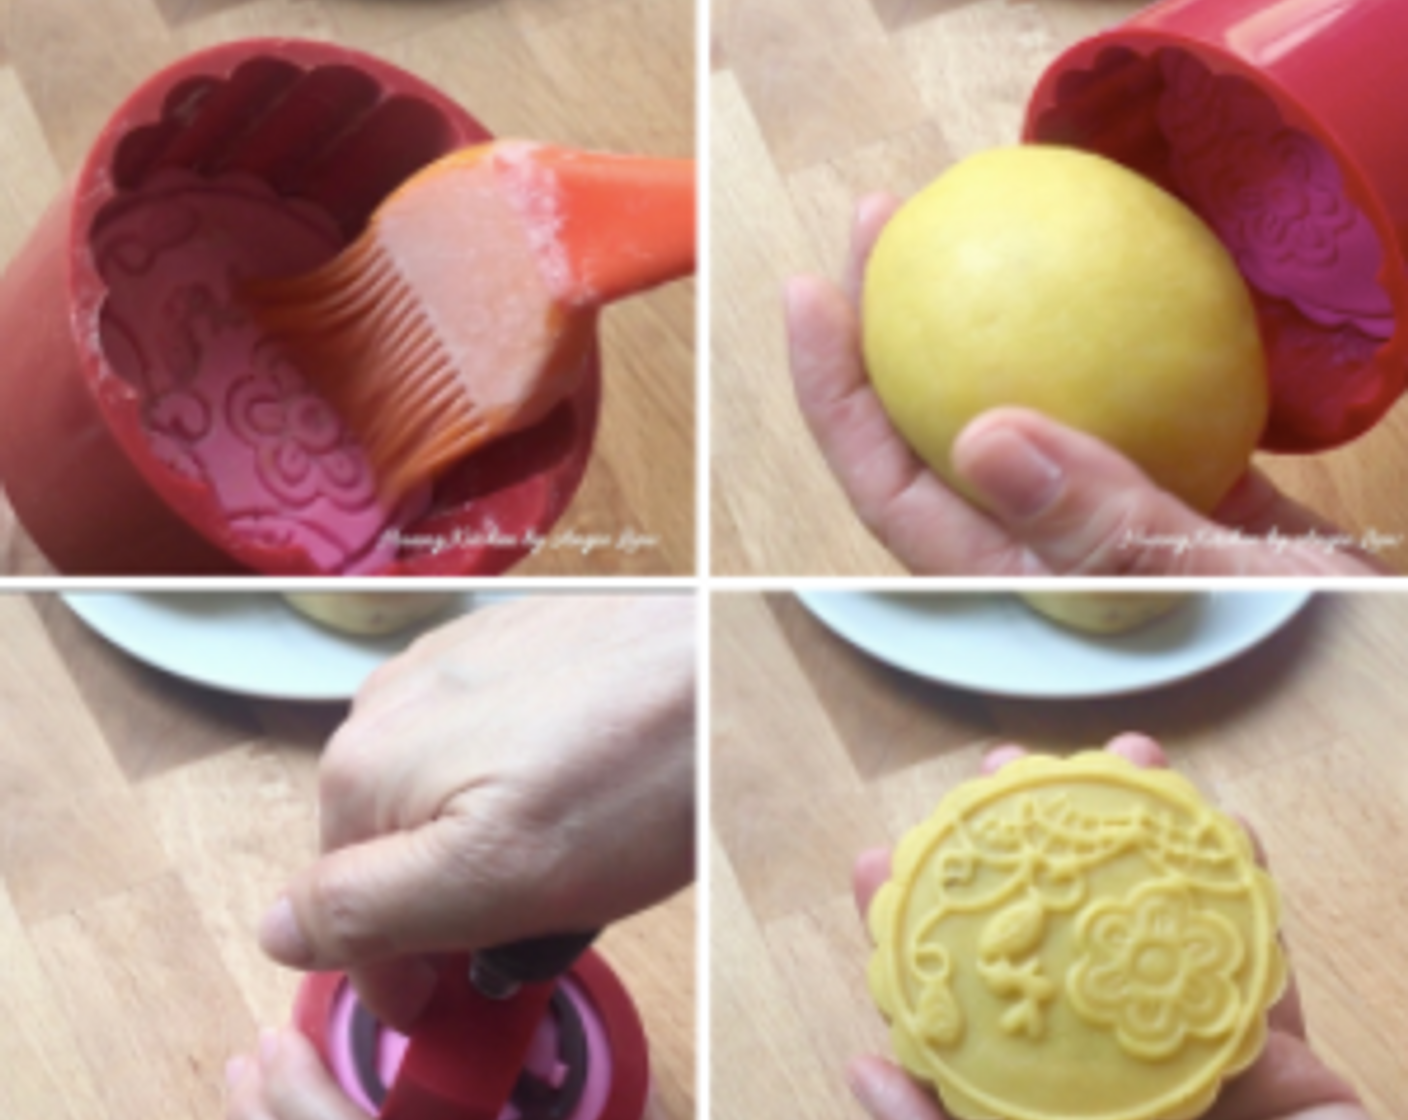 step 10 Next, mould the mooncake. Dust a little flour on the mooncake mould. Place the stuffed round mooncake into the mould. Turn it UPRIGHT on a smooth surface. Then press the plunger down until you feel resistance. Lift the mooncake mould off the surface and use the plunger to push the mooncake out.